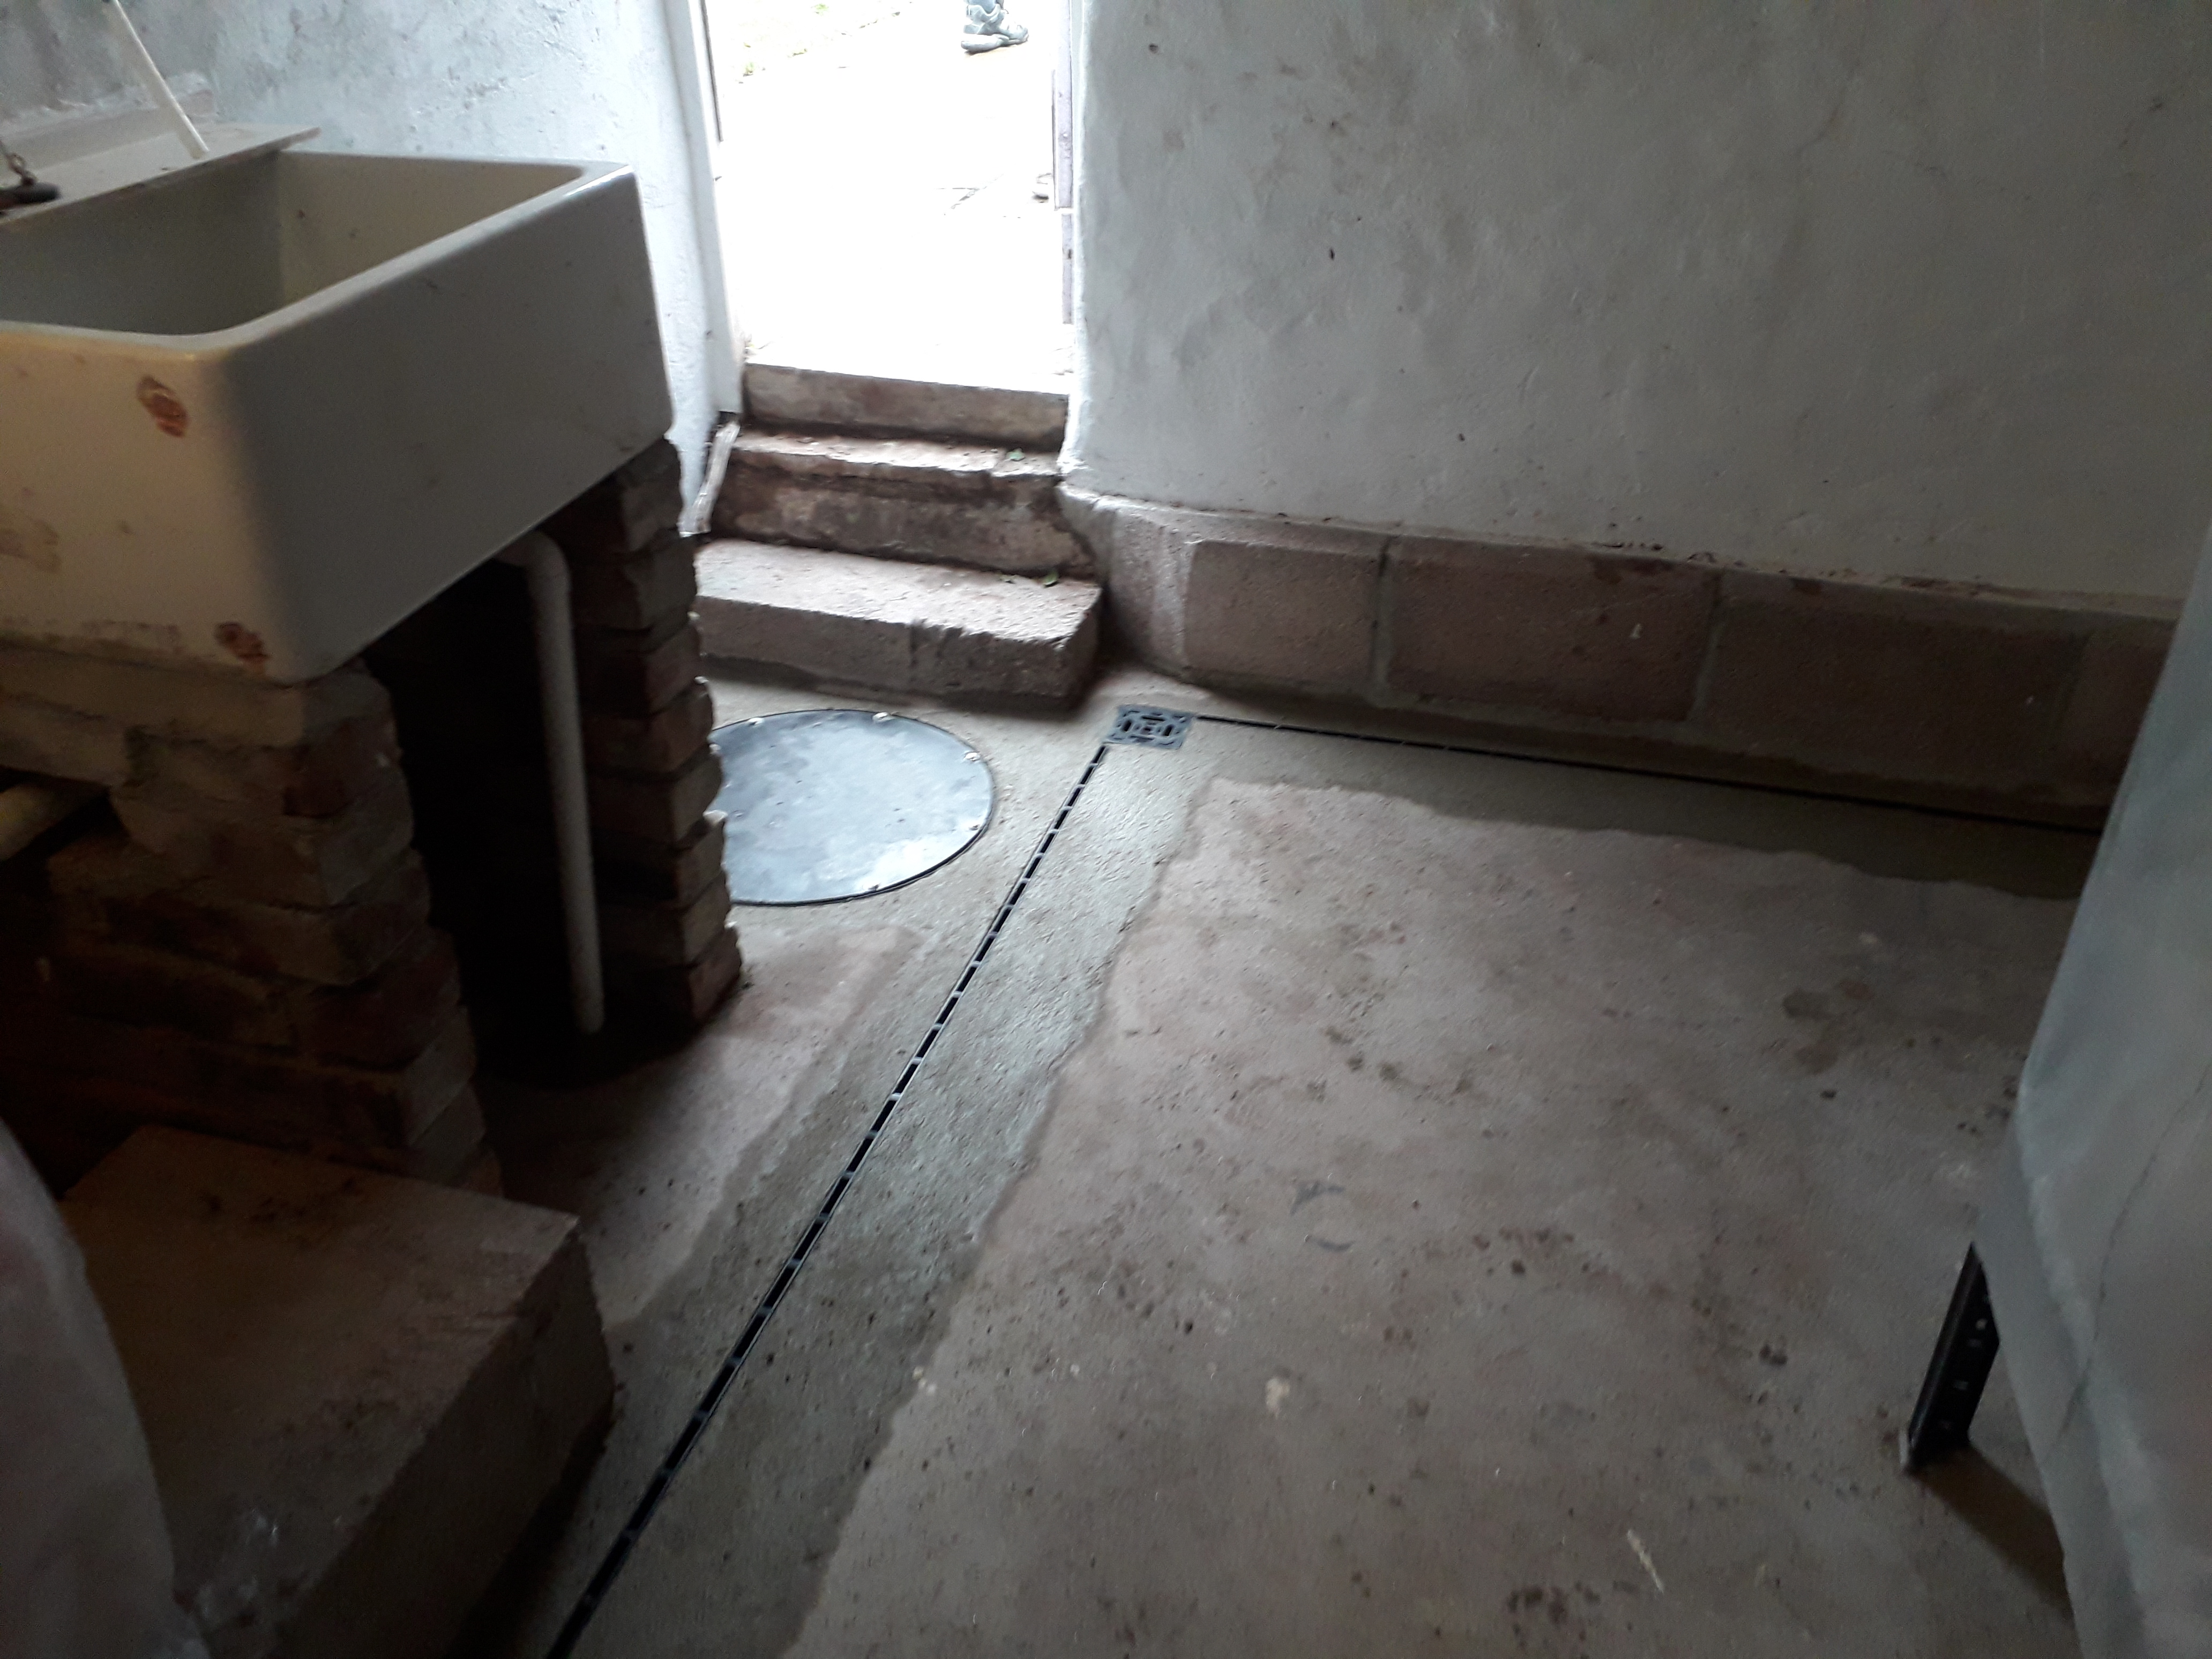 Damp-proofing